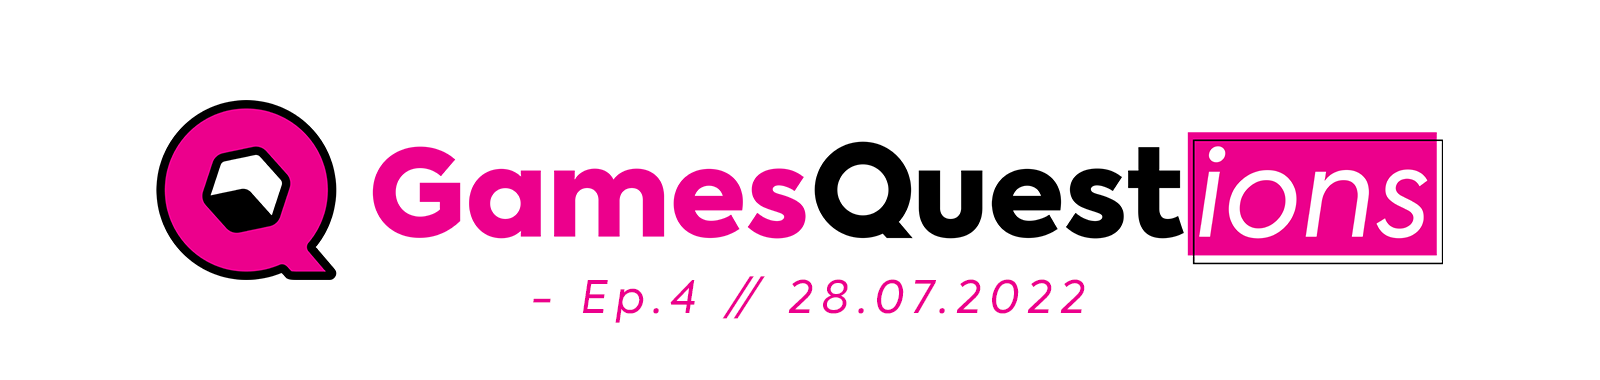 GamesQuestions Ep.4 // 28.07.2022